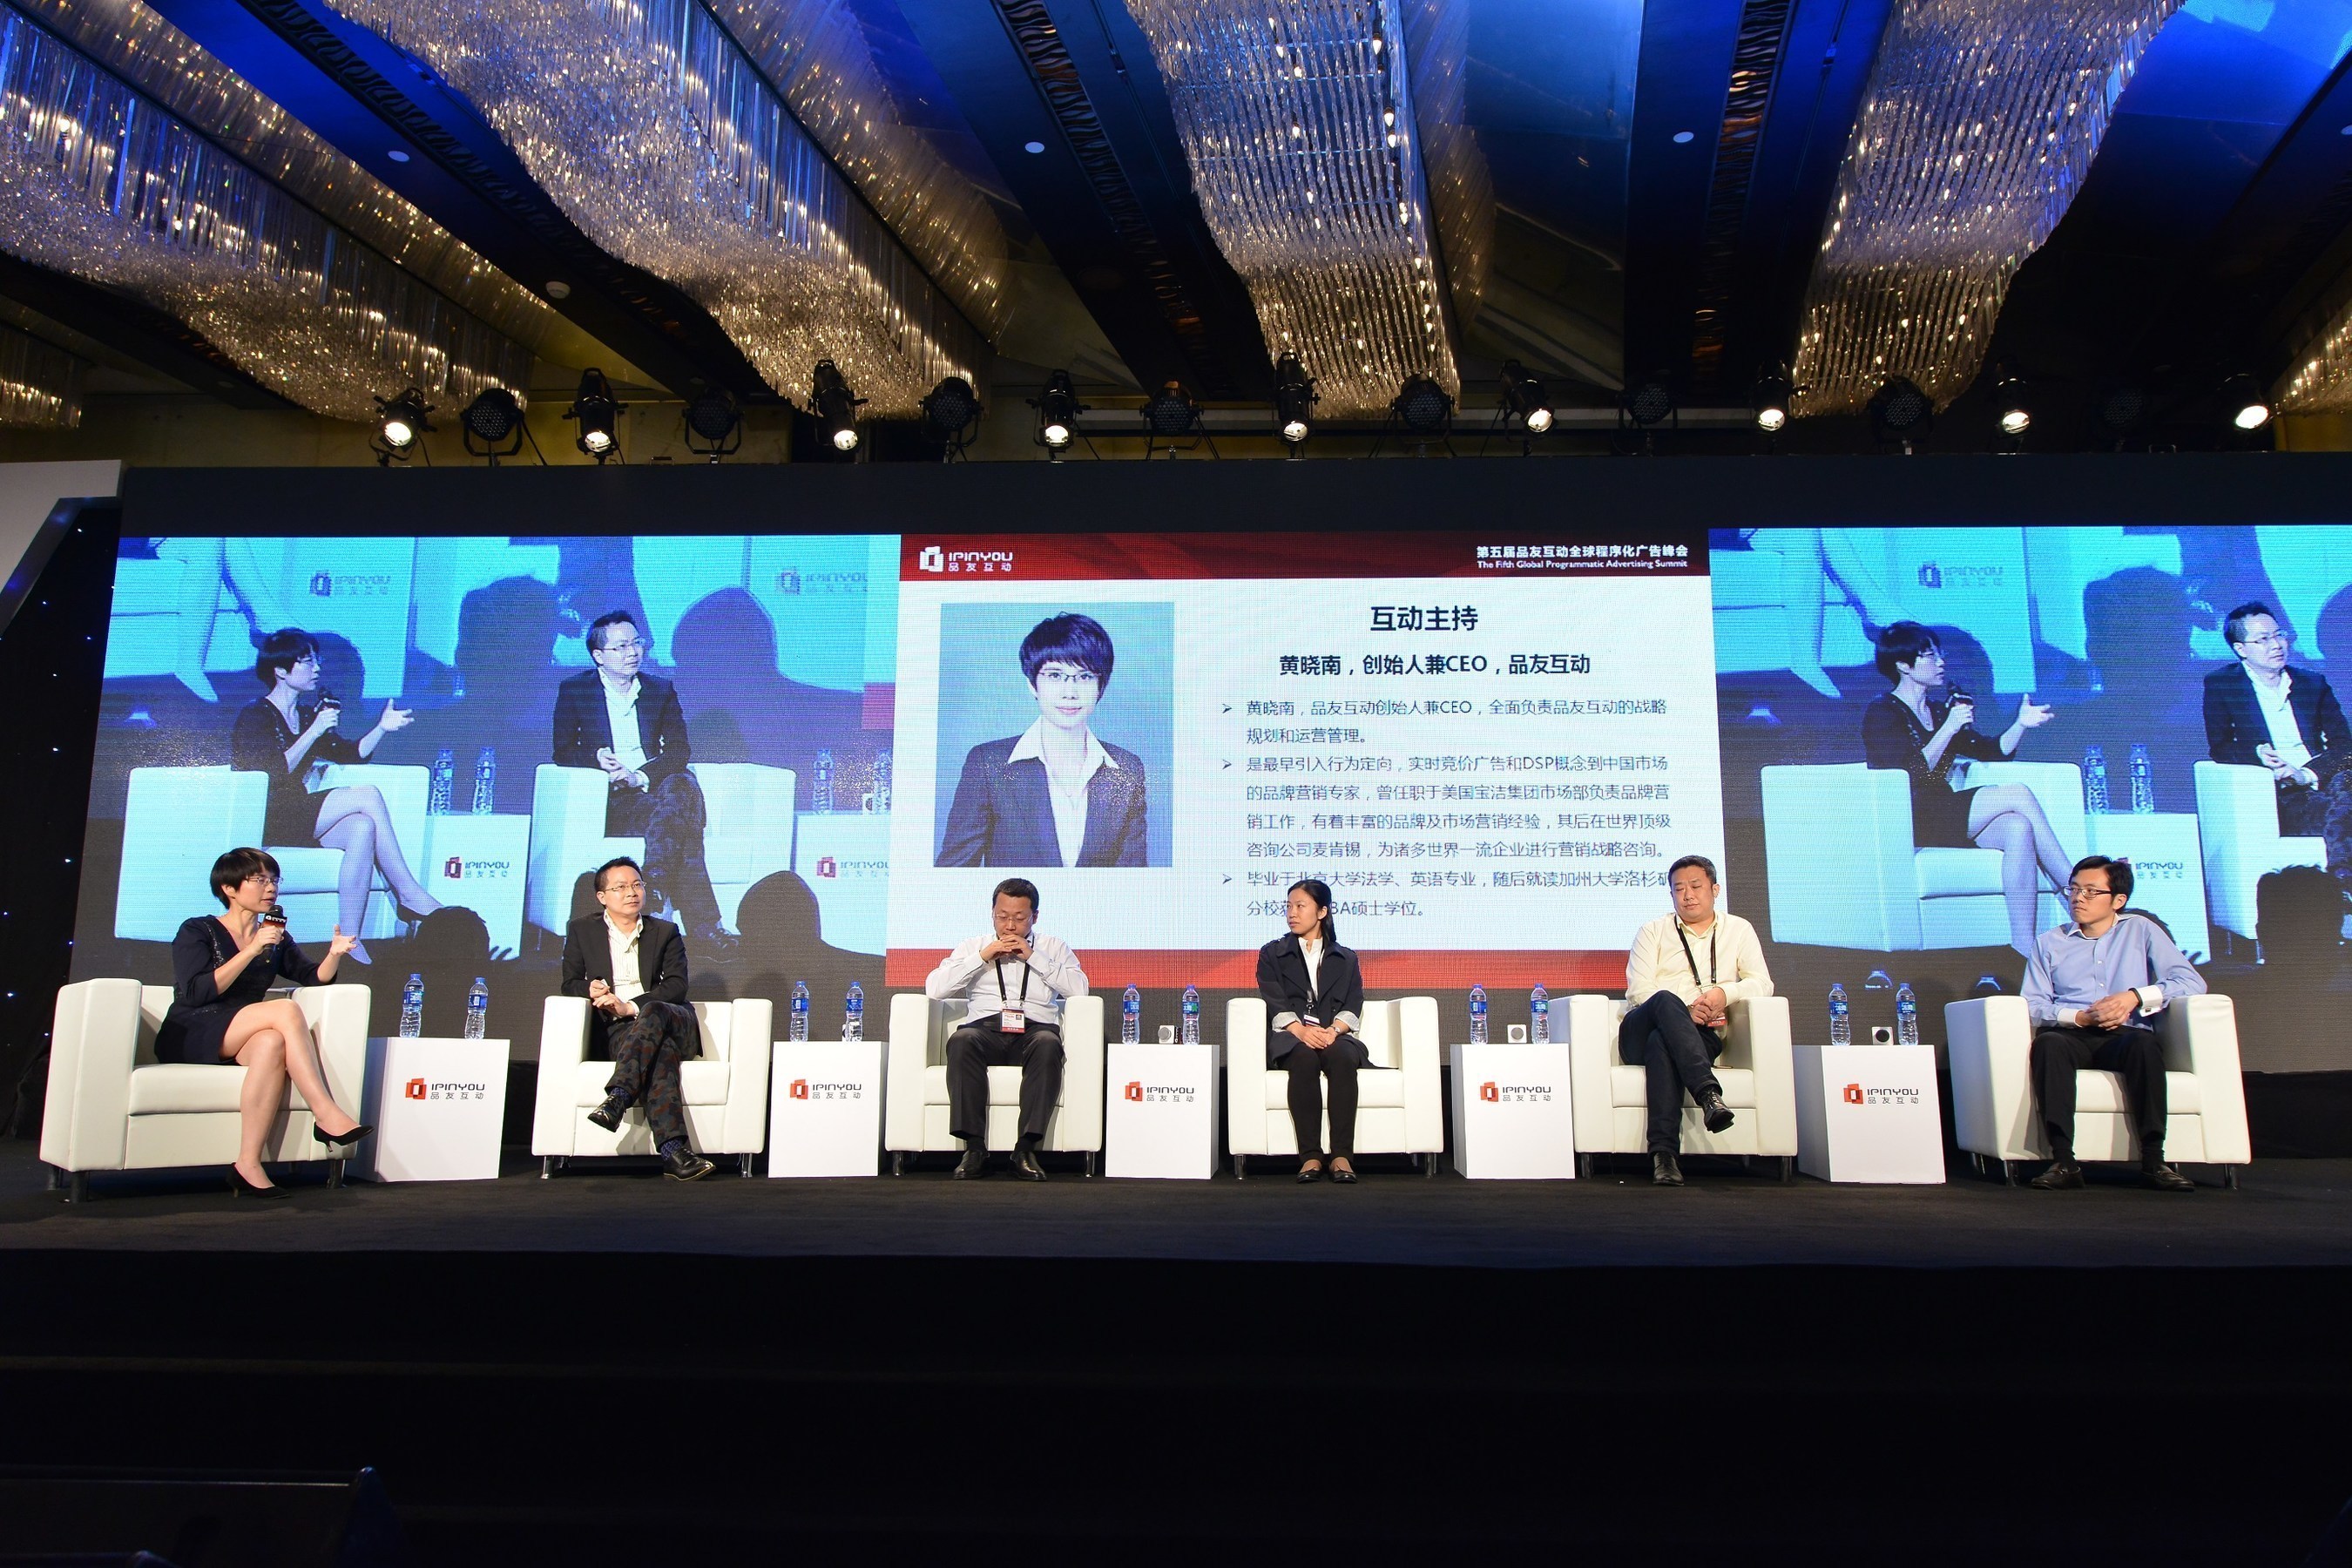 From left to right: Grace Huang (Founder & CEO of iPinYou), Guo Dongdong (VP of yhd.com), Song Zhaowei (GM of Marketing of Haier Group), Shen Qin (Director of Branding of LUFAX), Yao Xiangdong (GM of Marketing of HANAJIRUSH China), Lu Ting (Head of Branding Media and Big Data Projects of SGM)